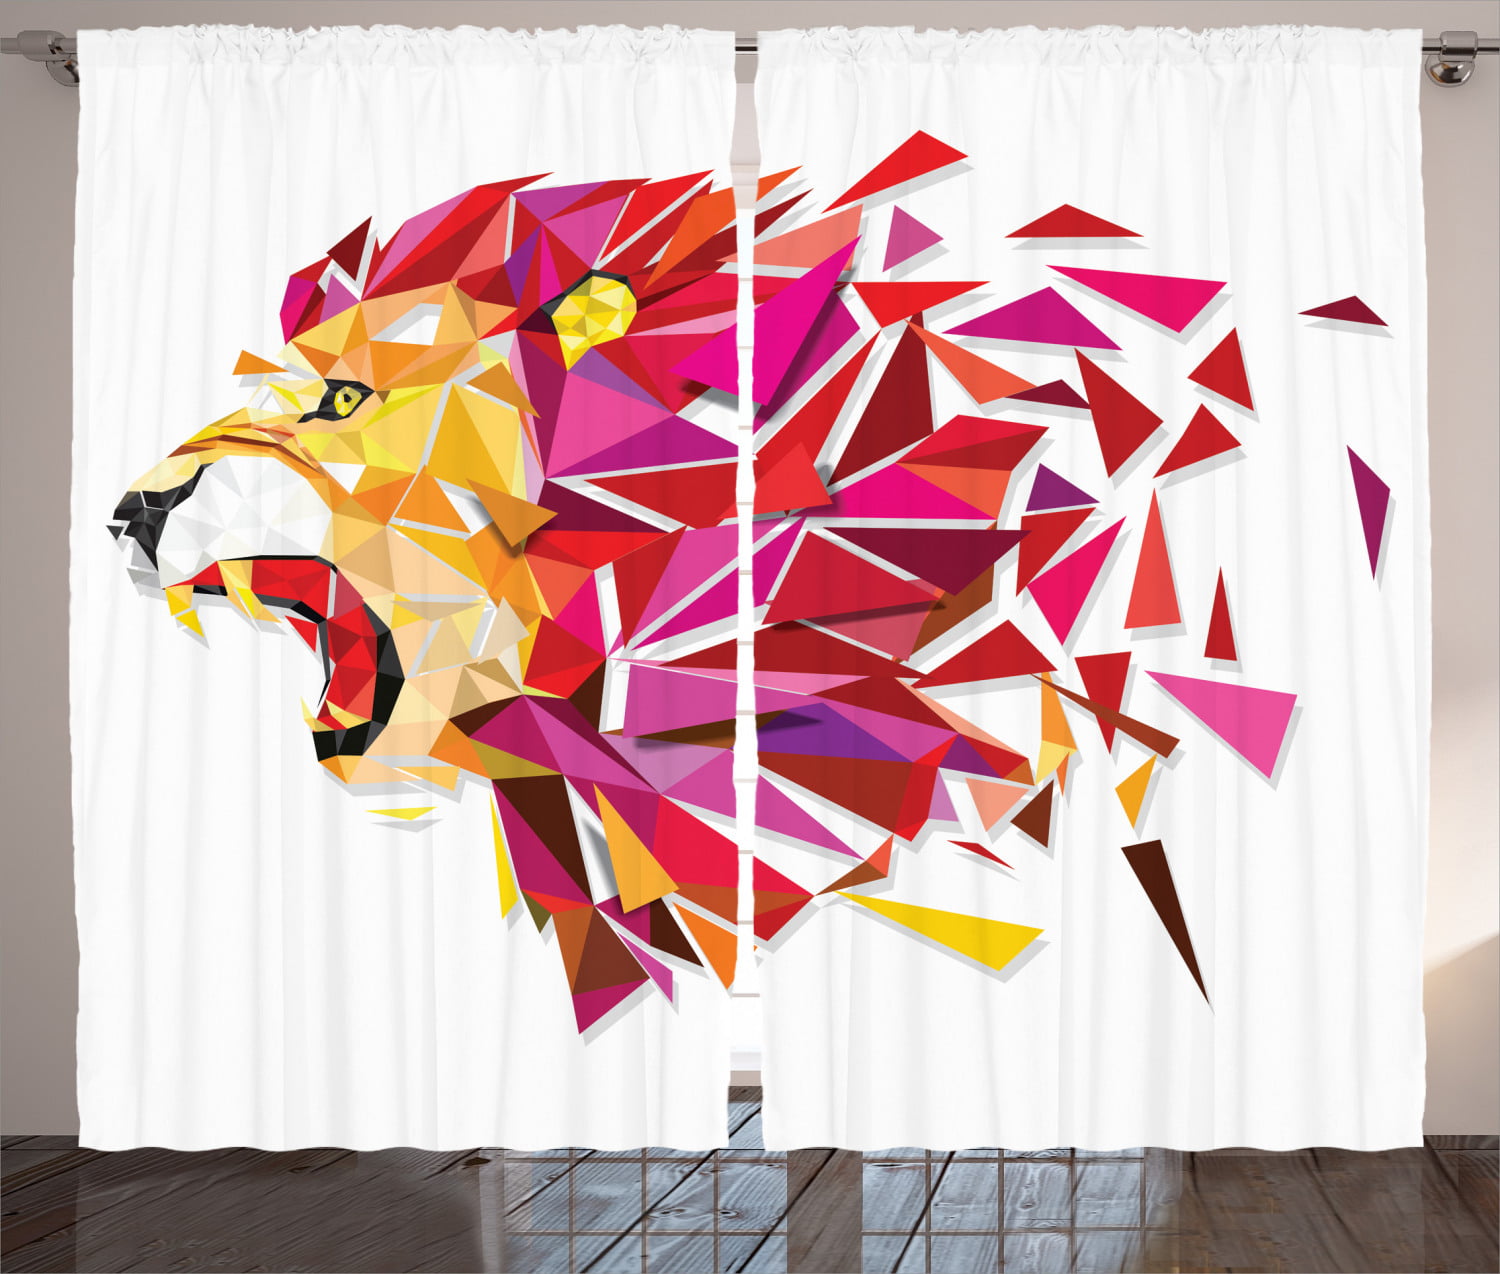 Two Lions Love Autumn 3D Blockout Photo Printing Curtains Draps Fabric Window 